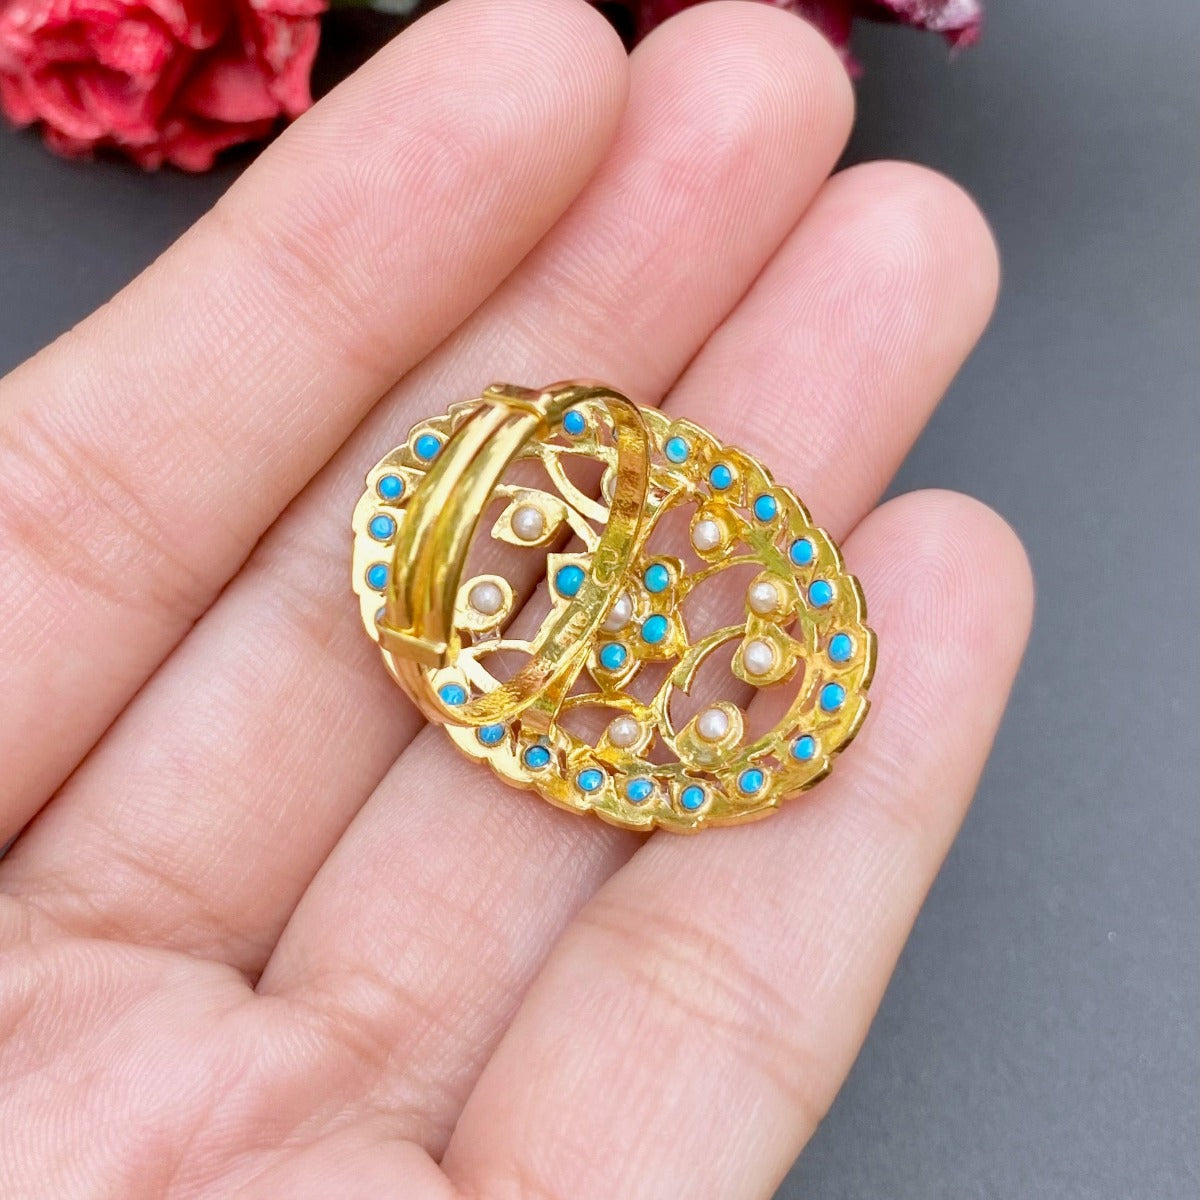 Vintage Era Inspired Pearl and Turquoise Ring in 22ct Gold GLR 046